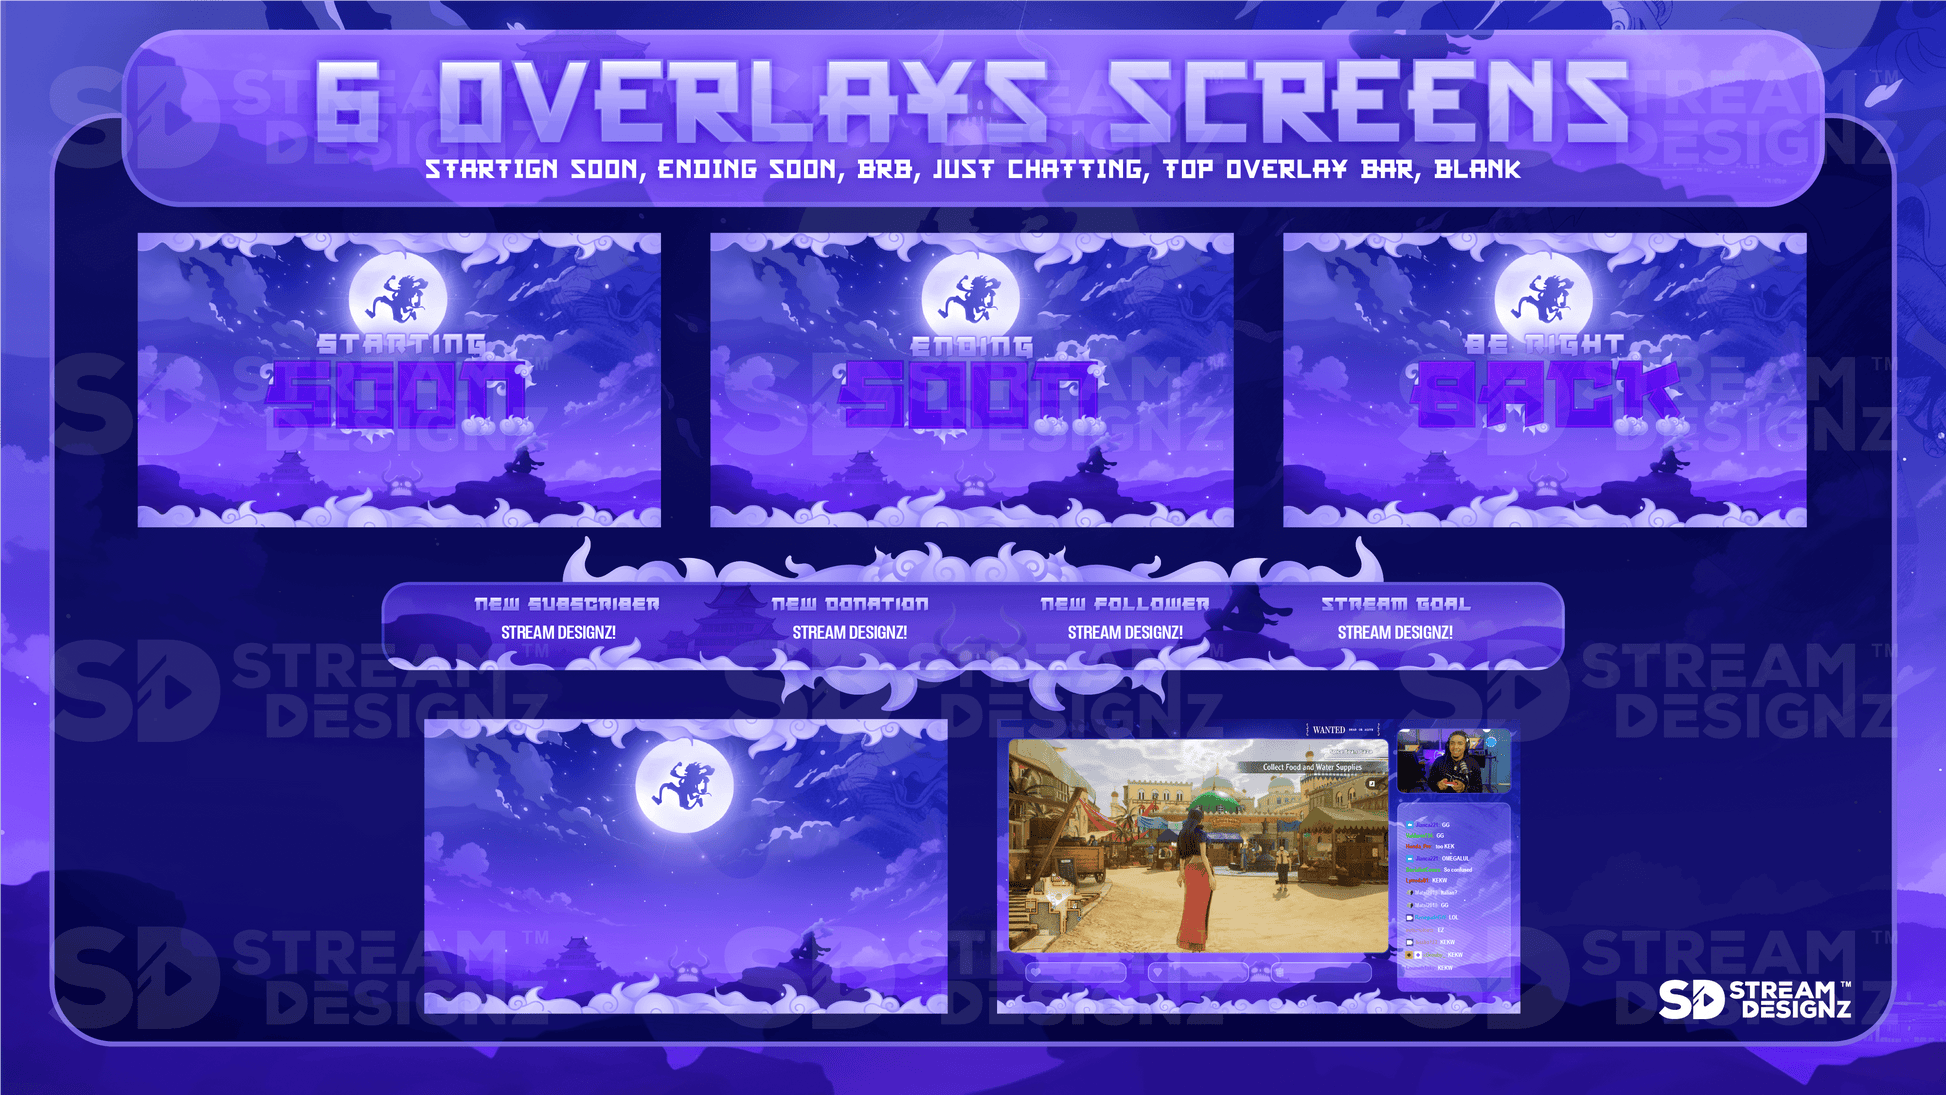 the ultimate stream package 6 overlay screens luffy stream designz